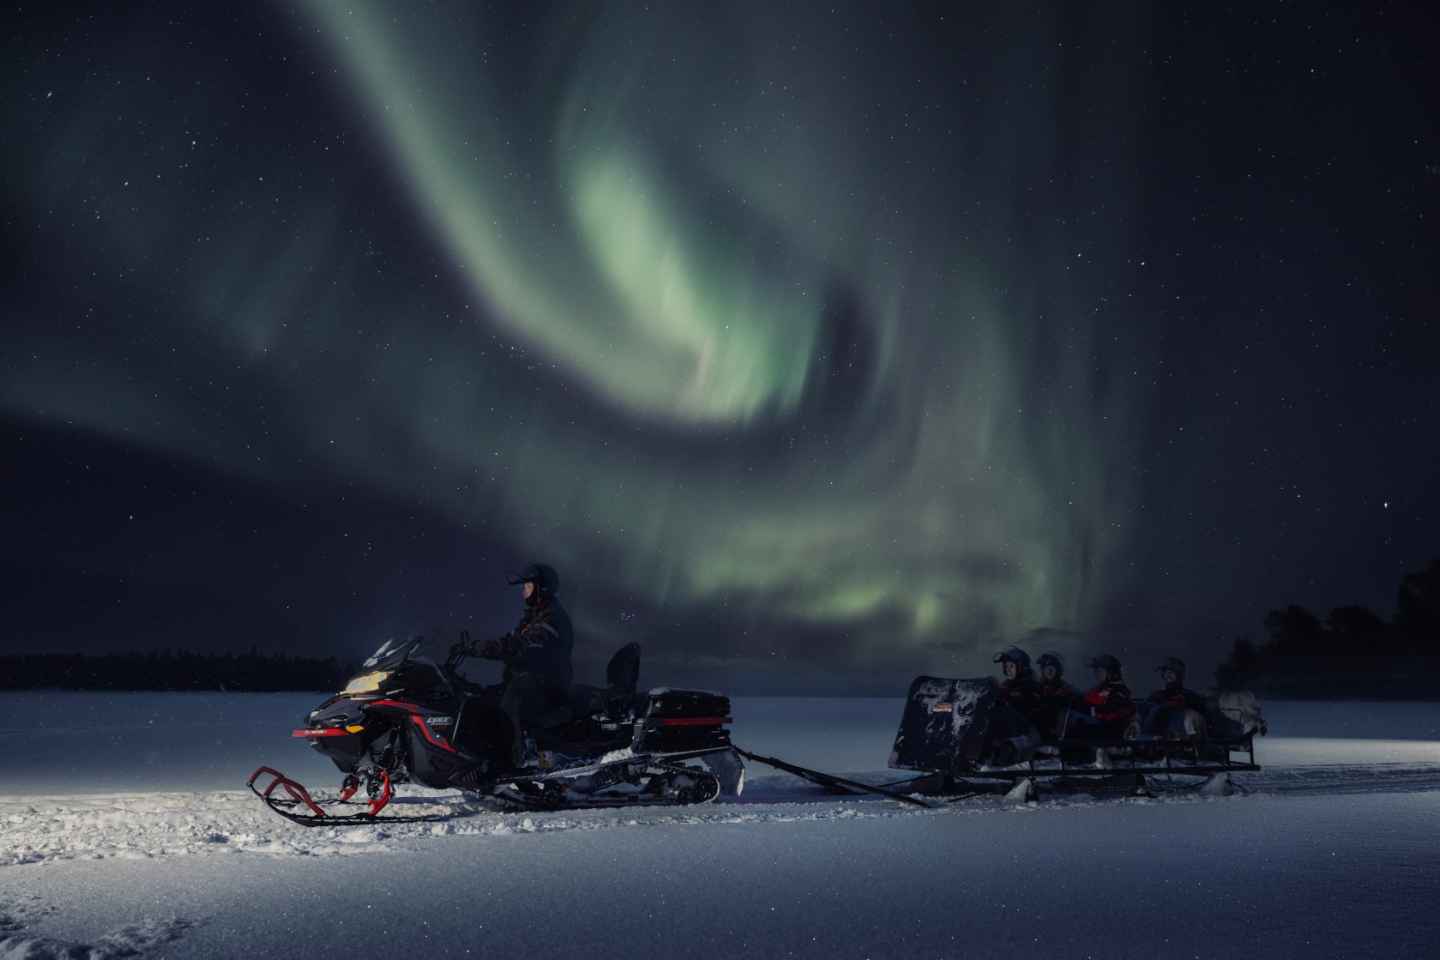 Ruka: Starlight sledging to search for Northern Lights